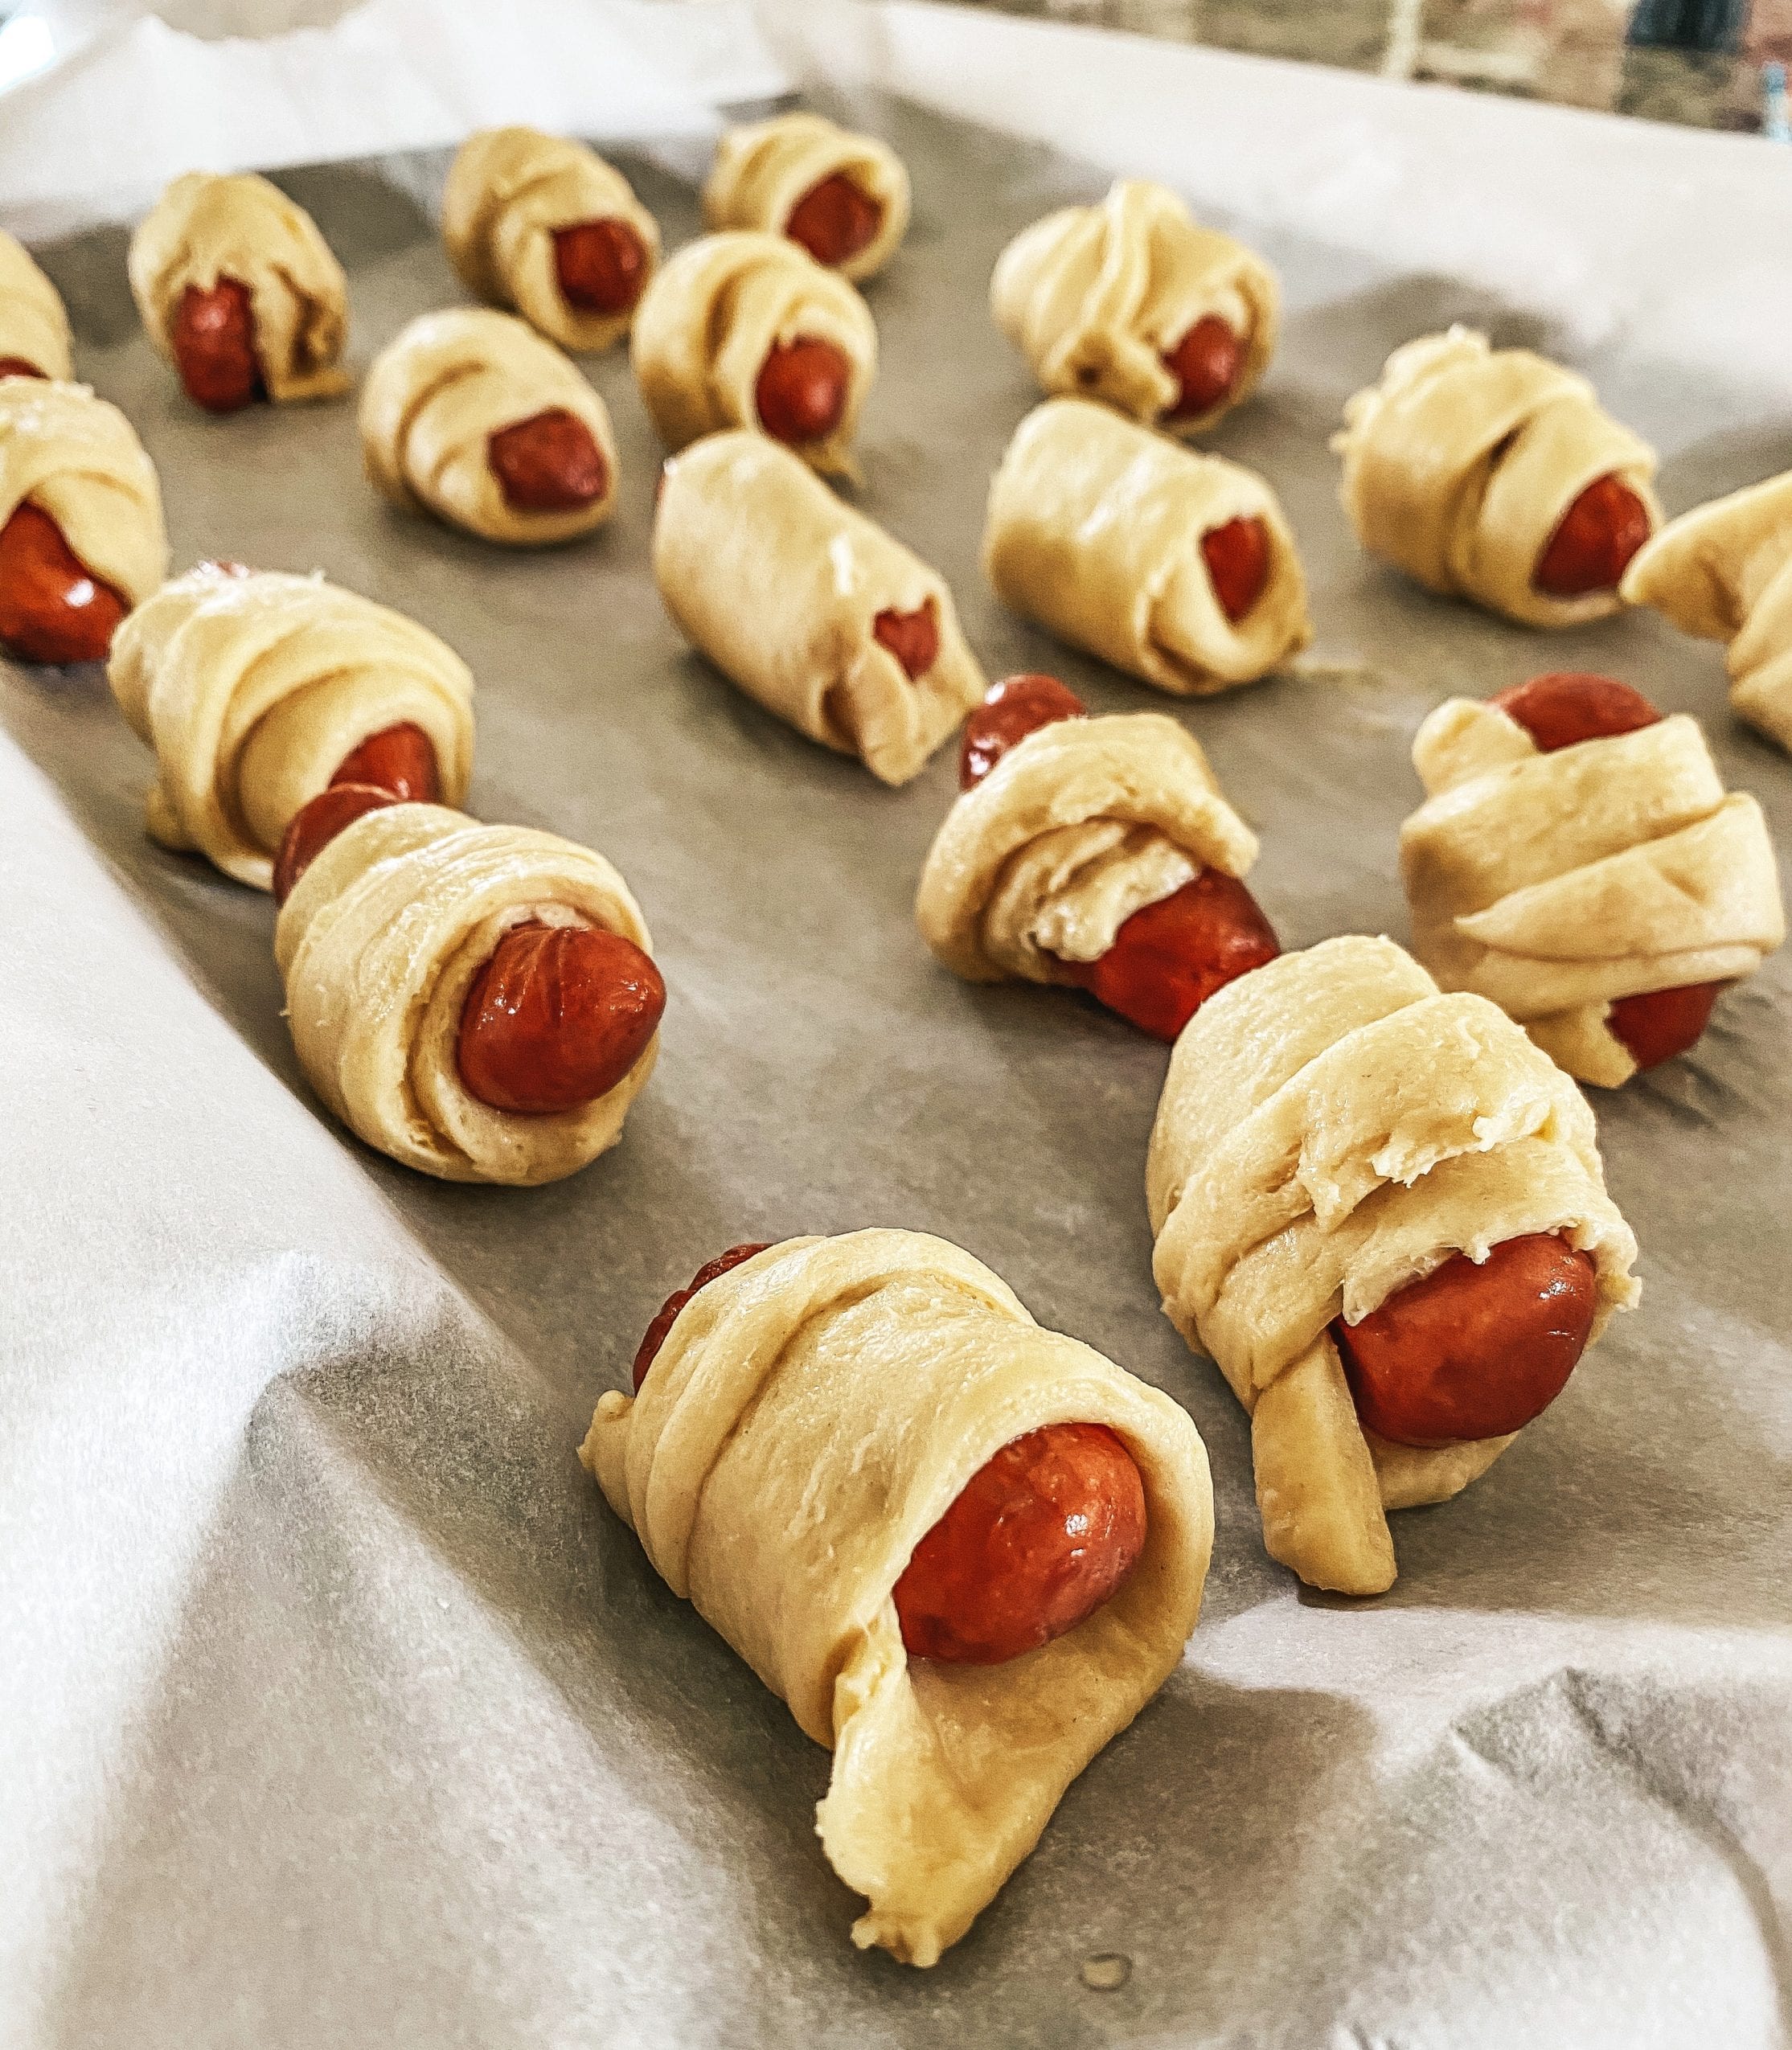 Pigs in a blanket ready to be baked